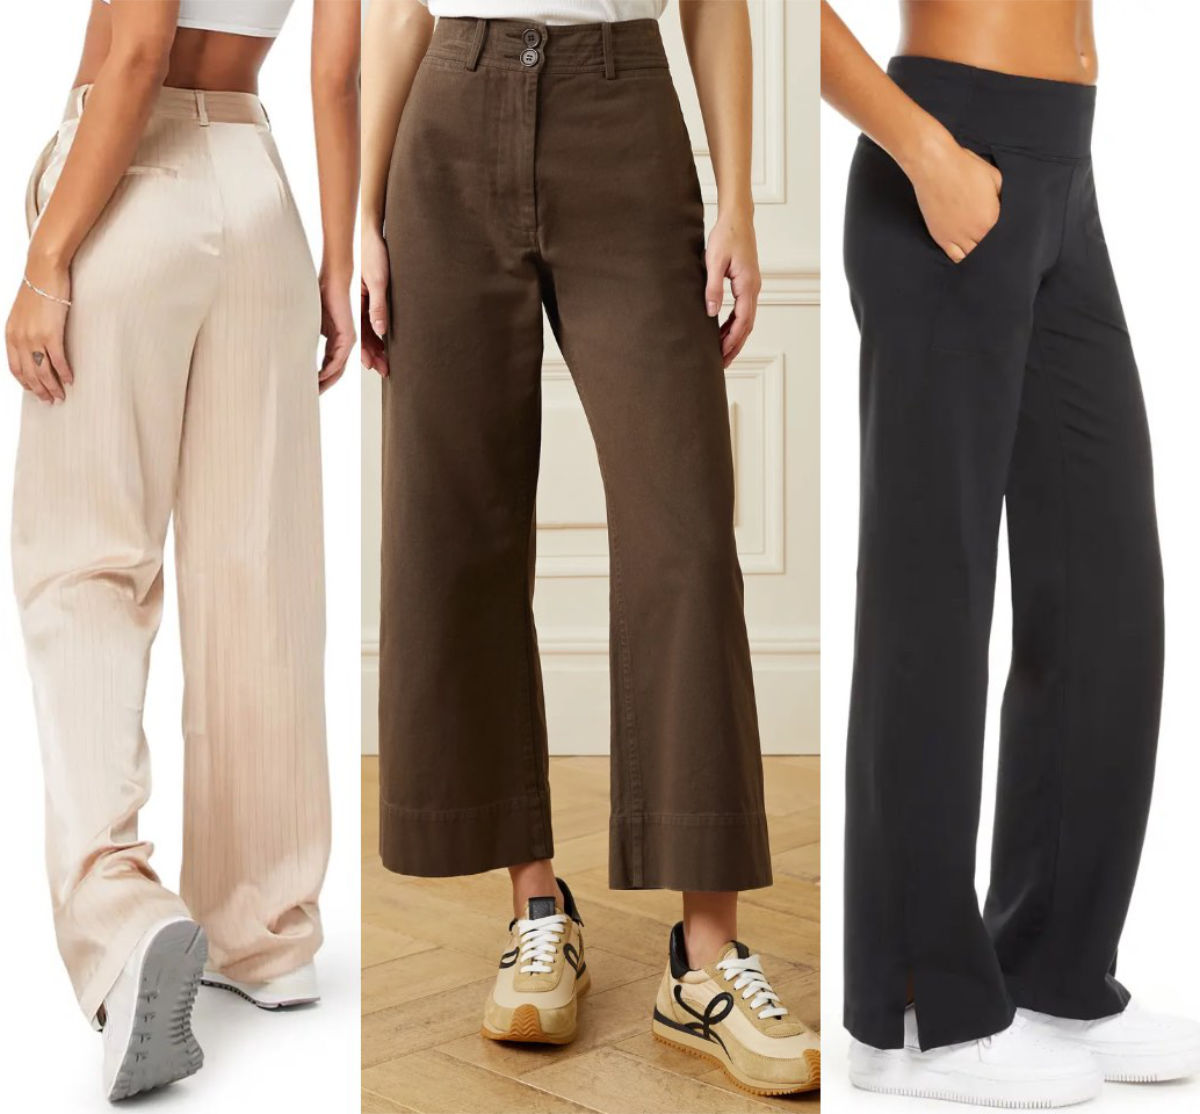 Best Shoes to Wear With Wide Leg Pants for Women Story - ShoeTease Shoe  Blog & Styling Services